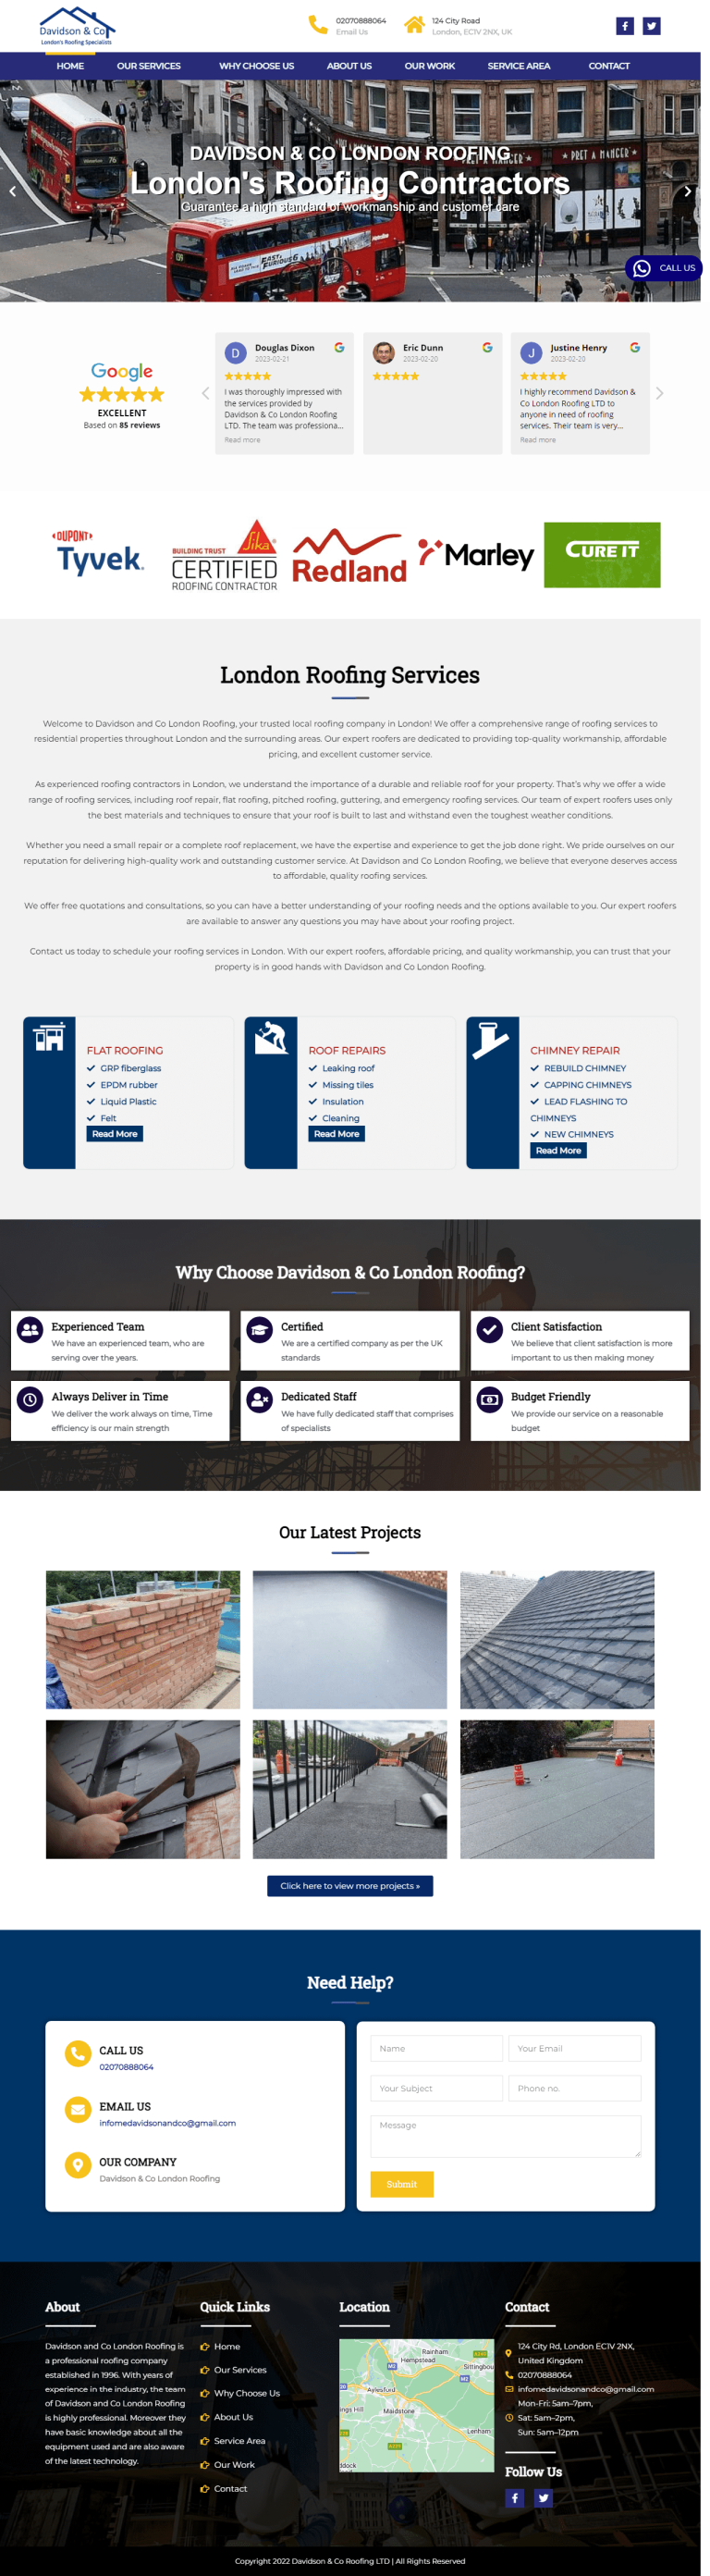 London Roofers _ #1 Roofing Services in London _ Get Free Quote! (1)